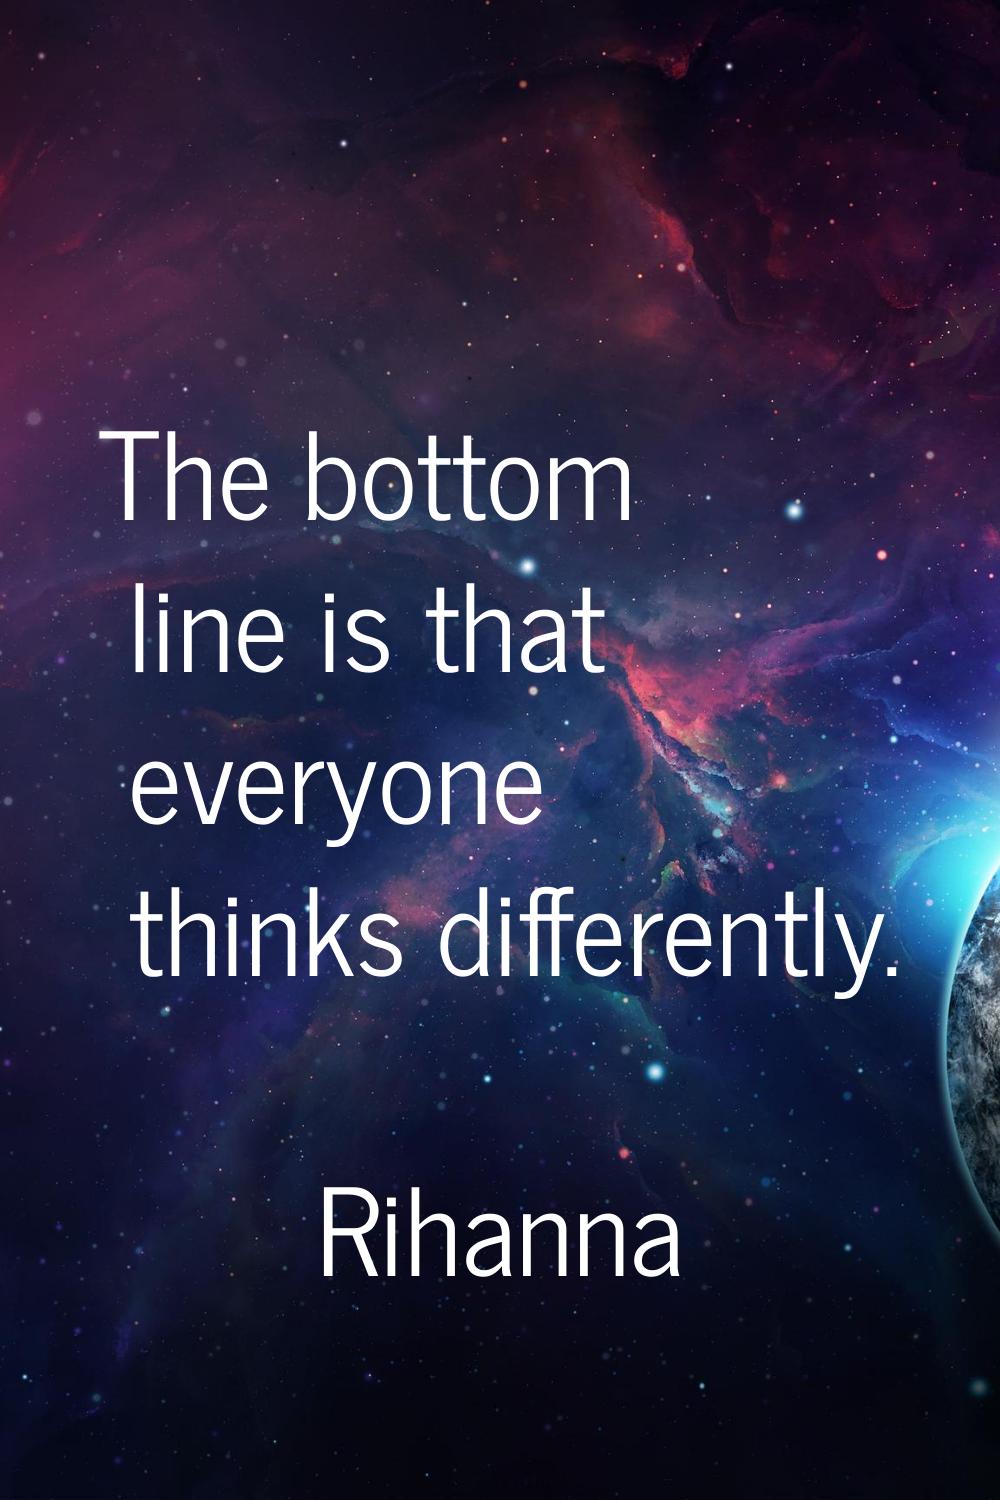 The bottom line is that everyone thinks differently.